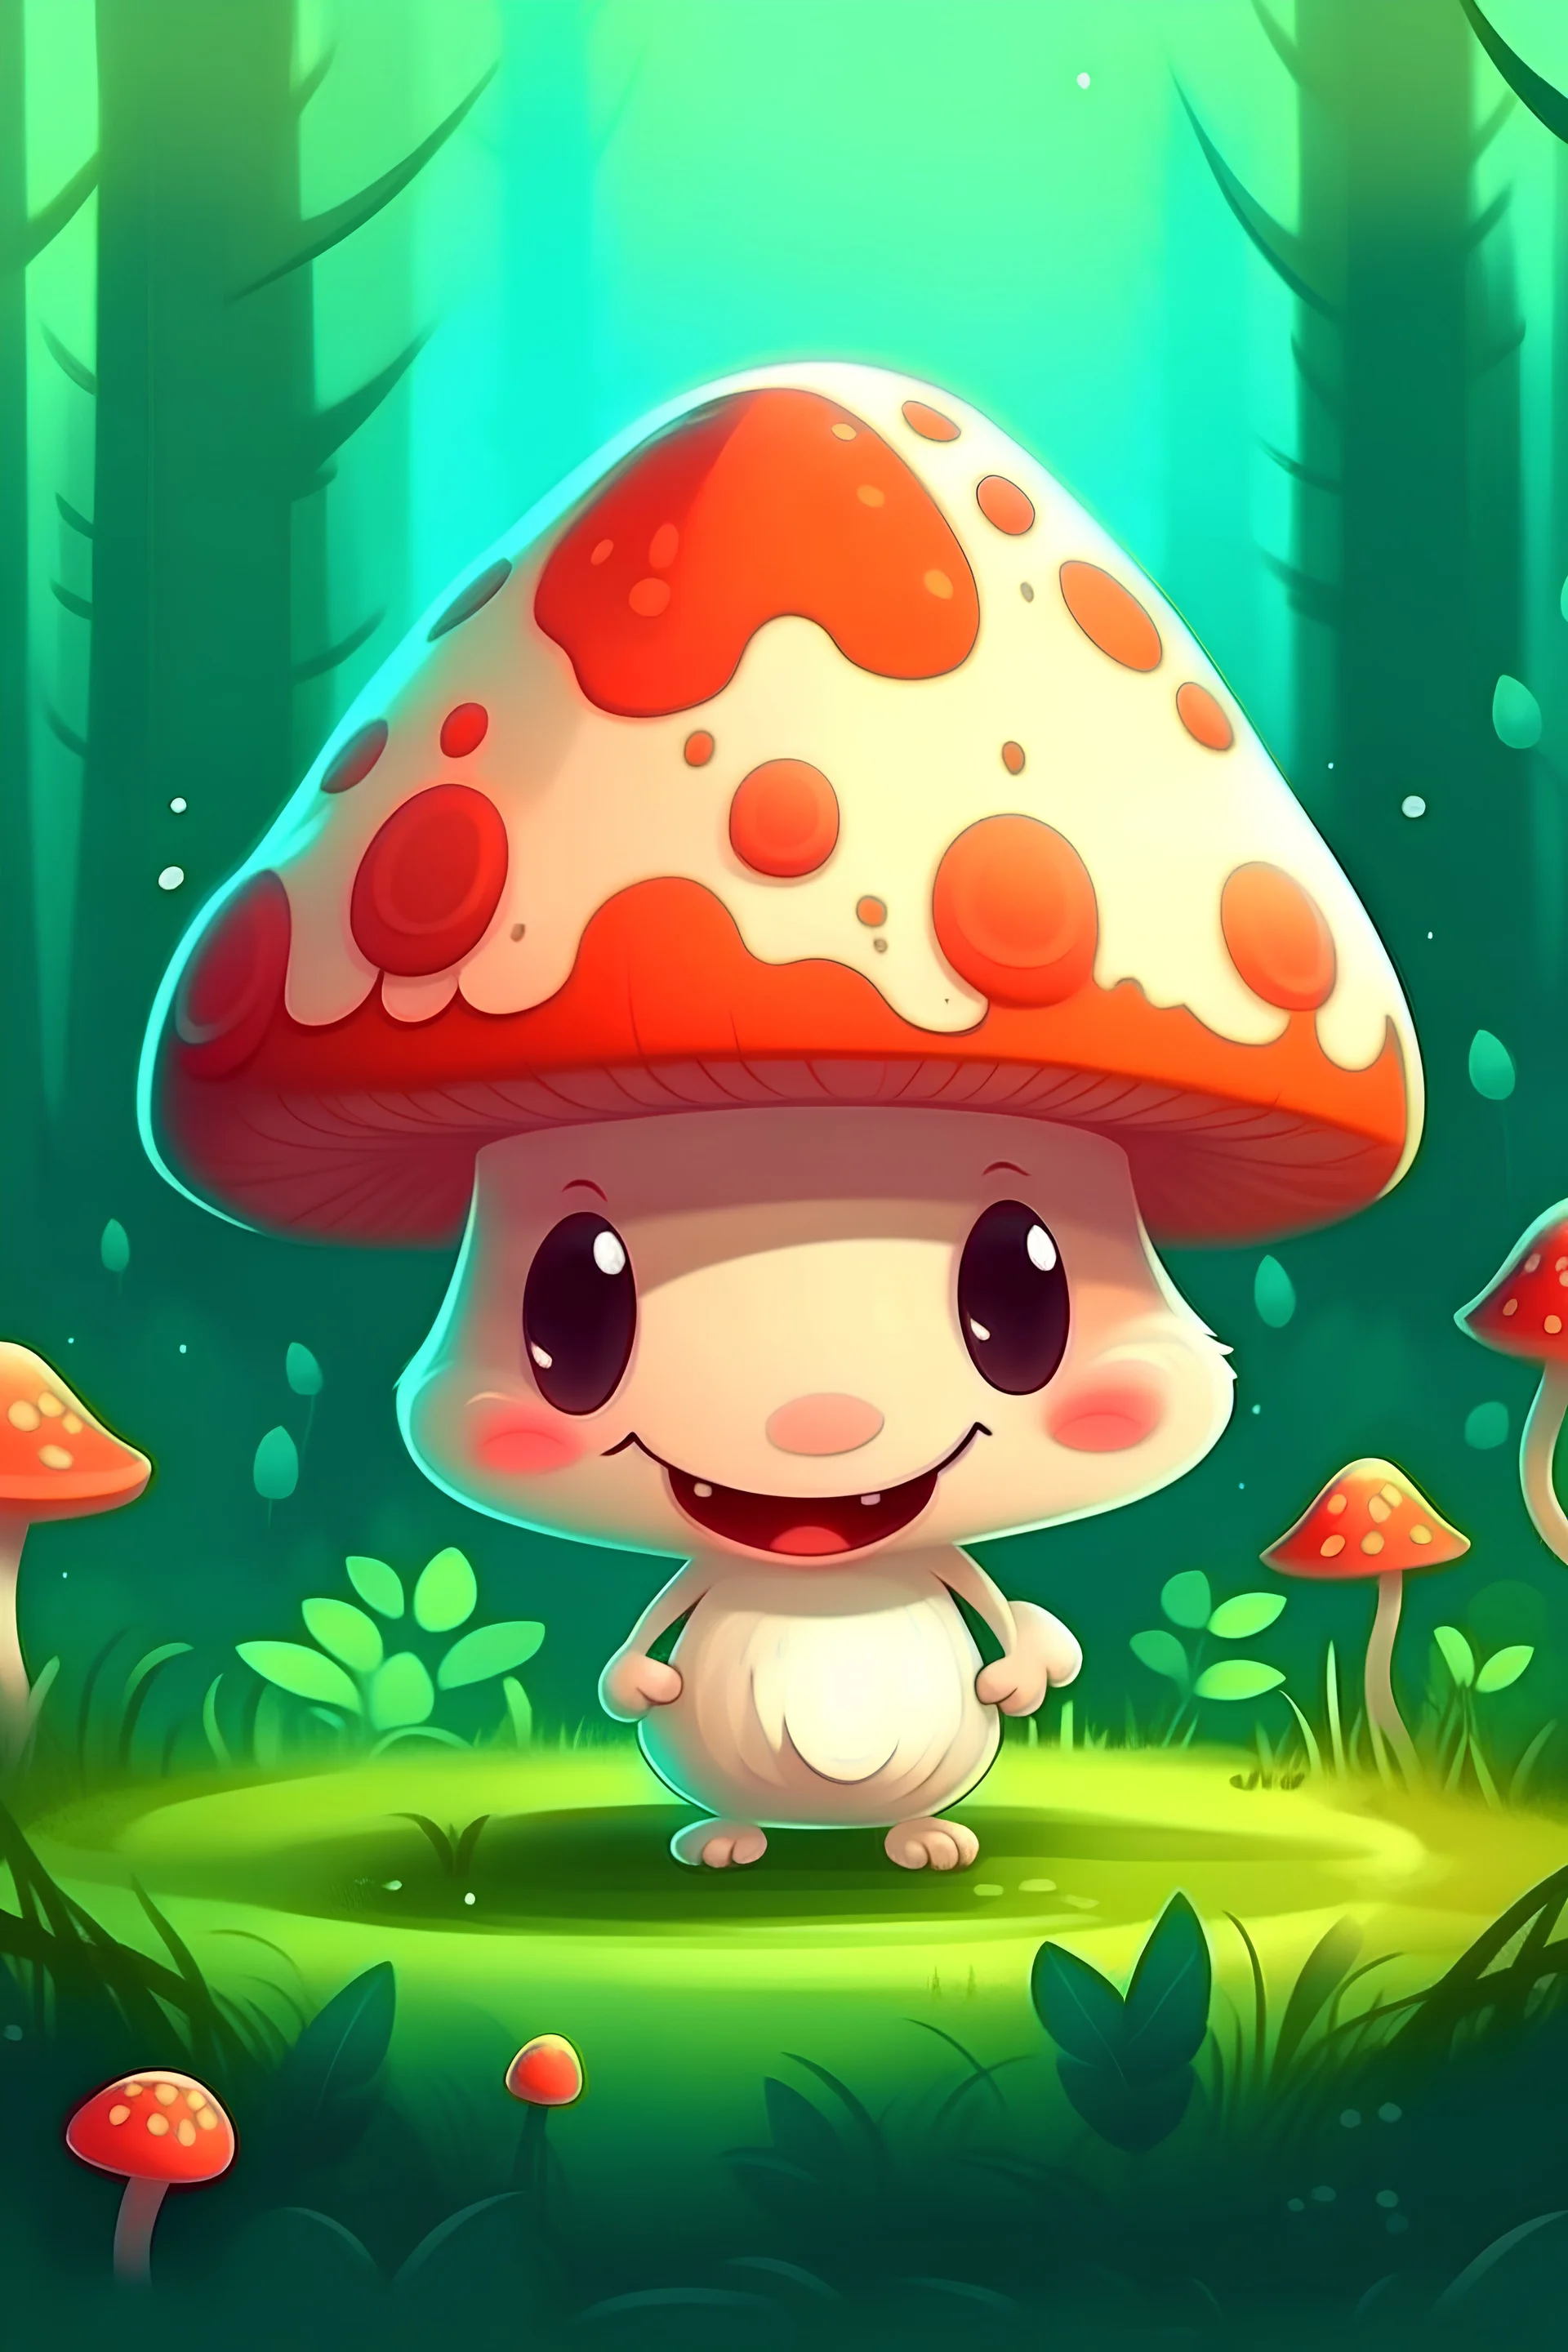 one Adorable Creepy Baby Mushroom, have fun and happy, friendly background, wearing baby clothes, in the forest, cartoon